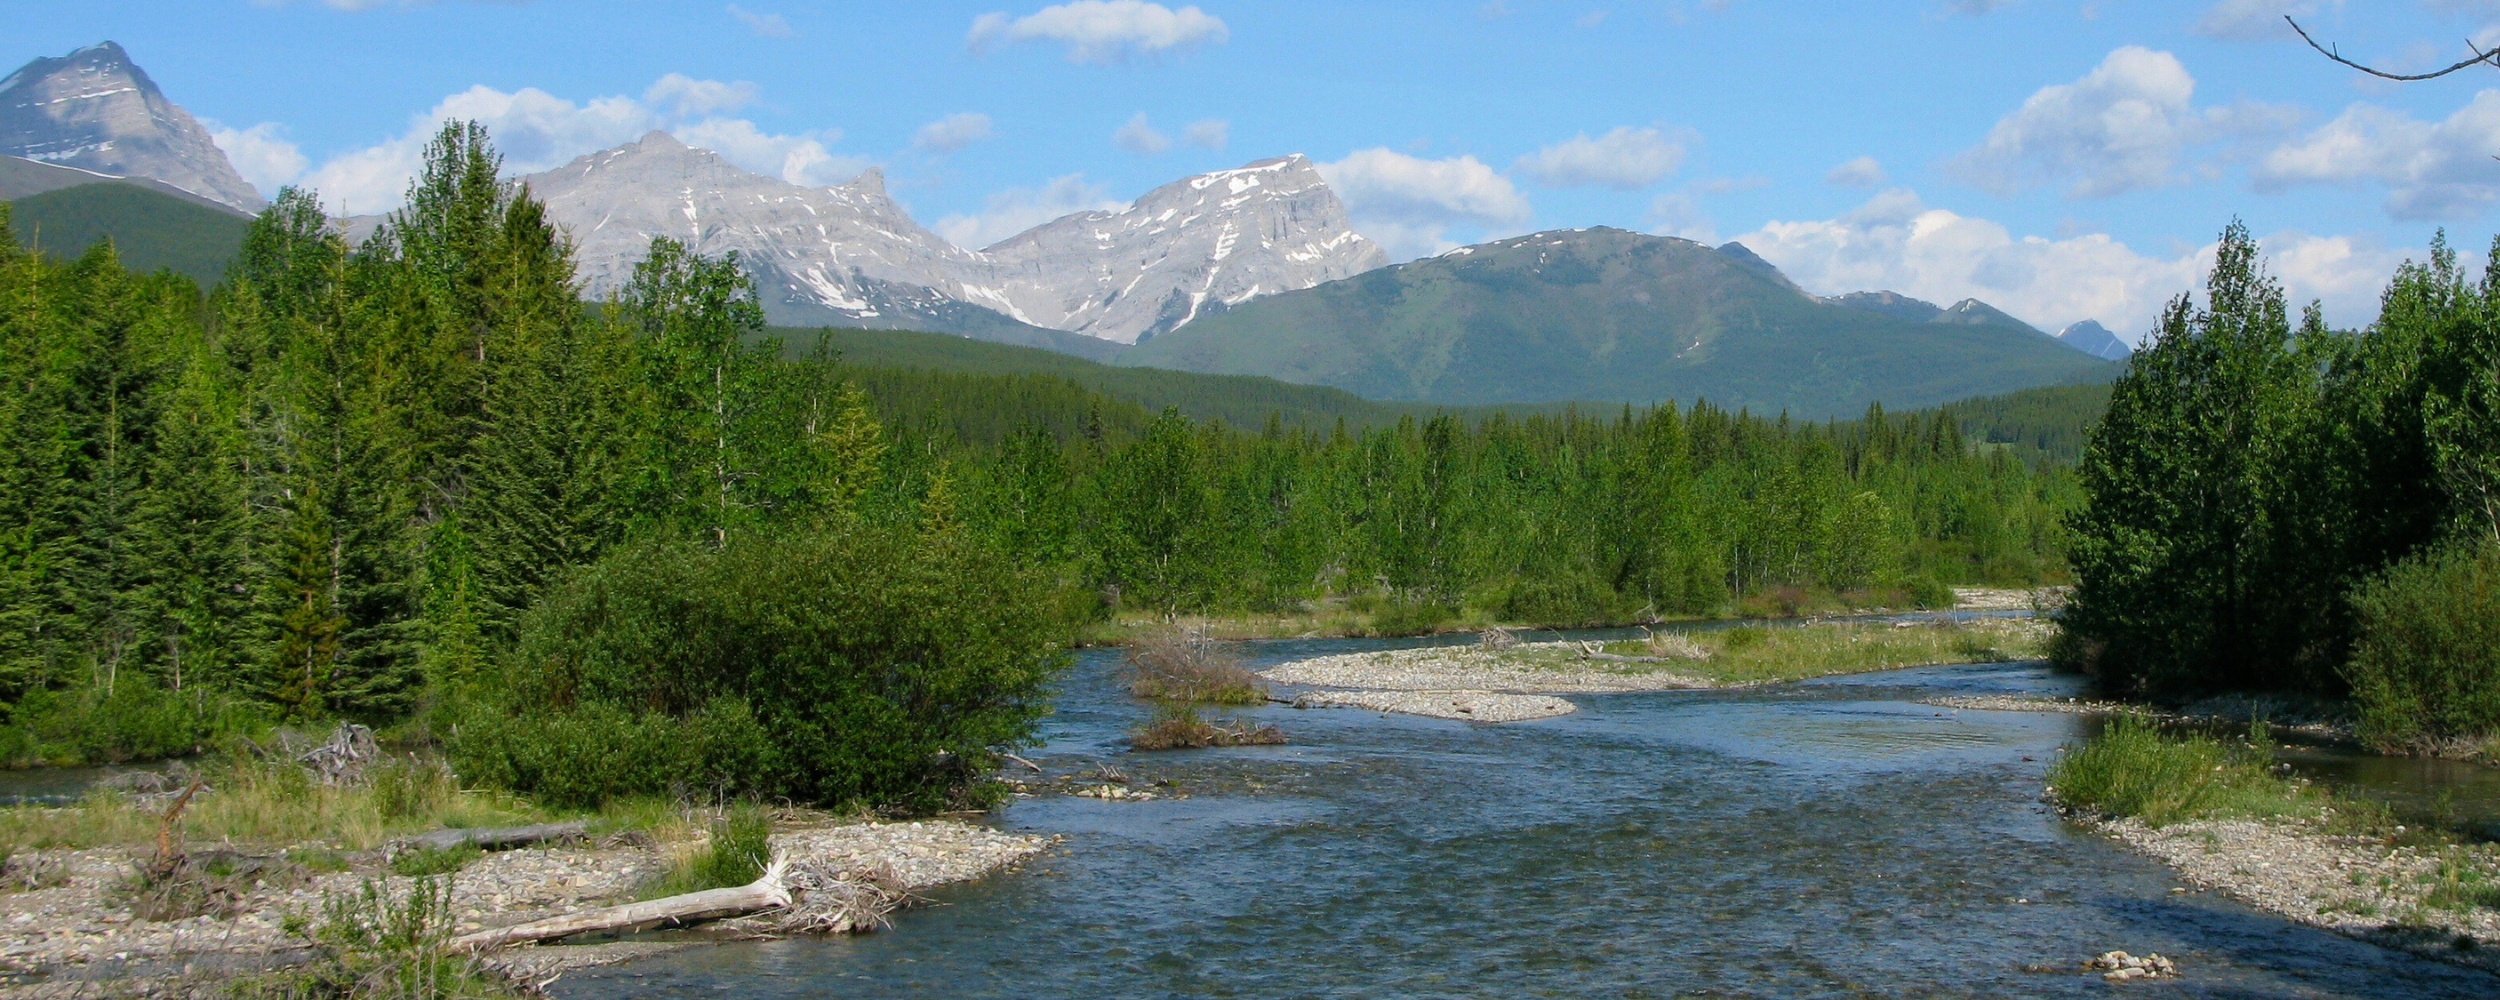 Featured image for “Over 1,100 Hectares of Clearcut Logging Planned for the Upper Highwood in Kananaskis”